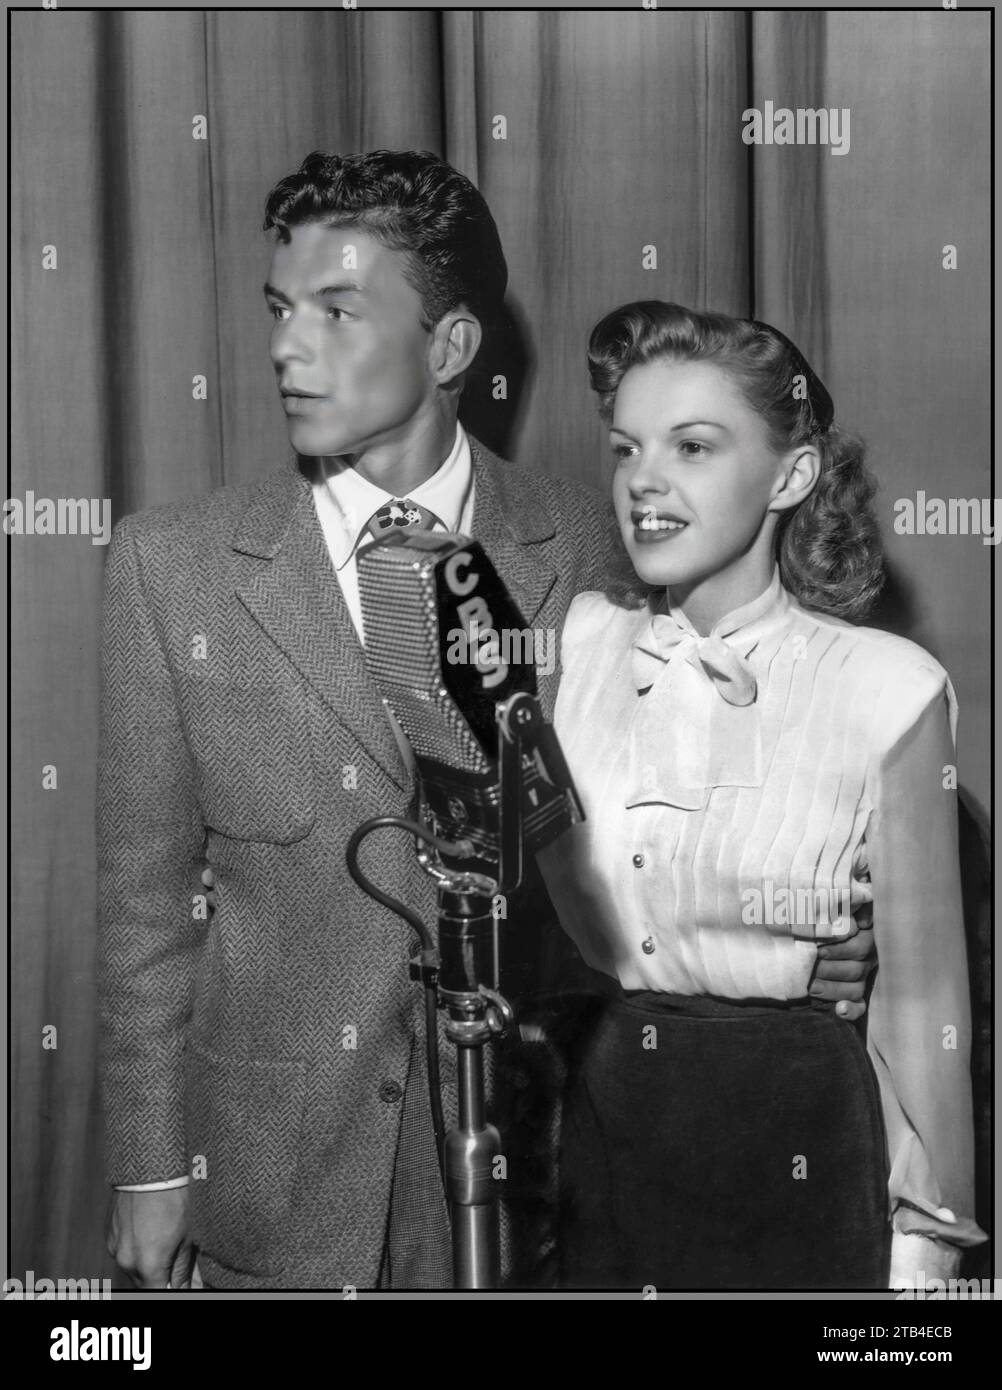 Frank Sinatra and Judy Garland together making a broadcast on the CBS radio network. Frank Sinatra Show 1944 USA Stock Photo